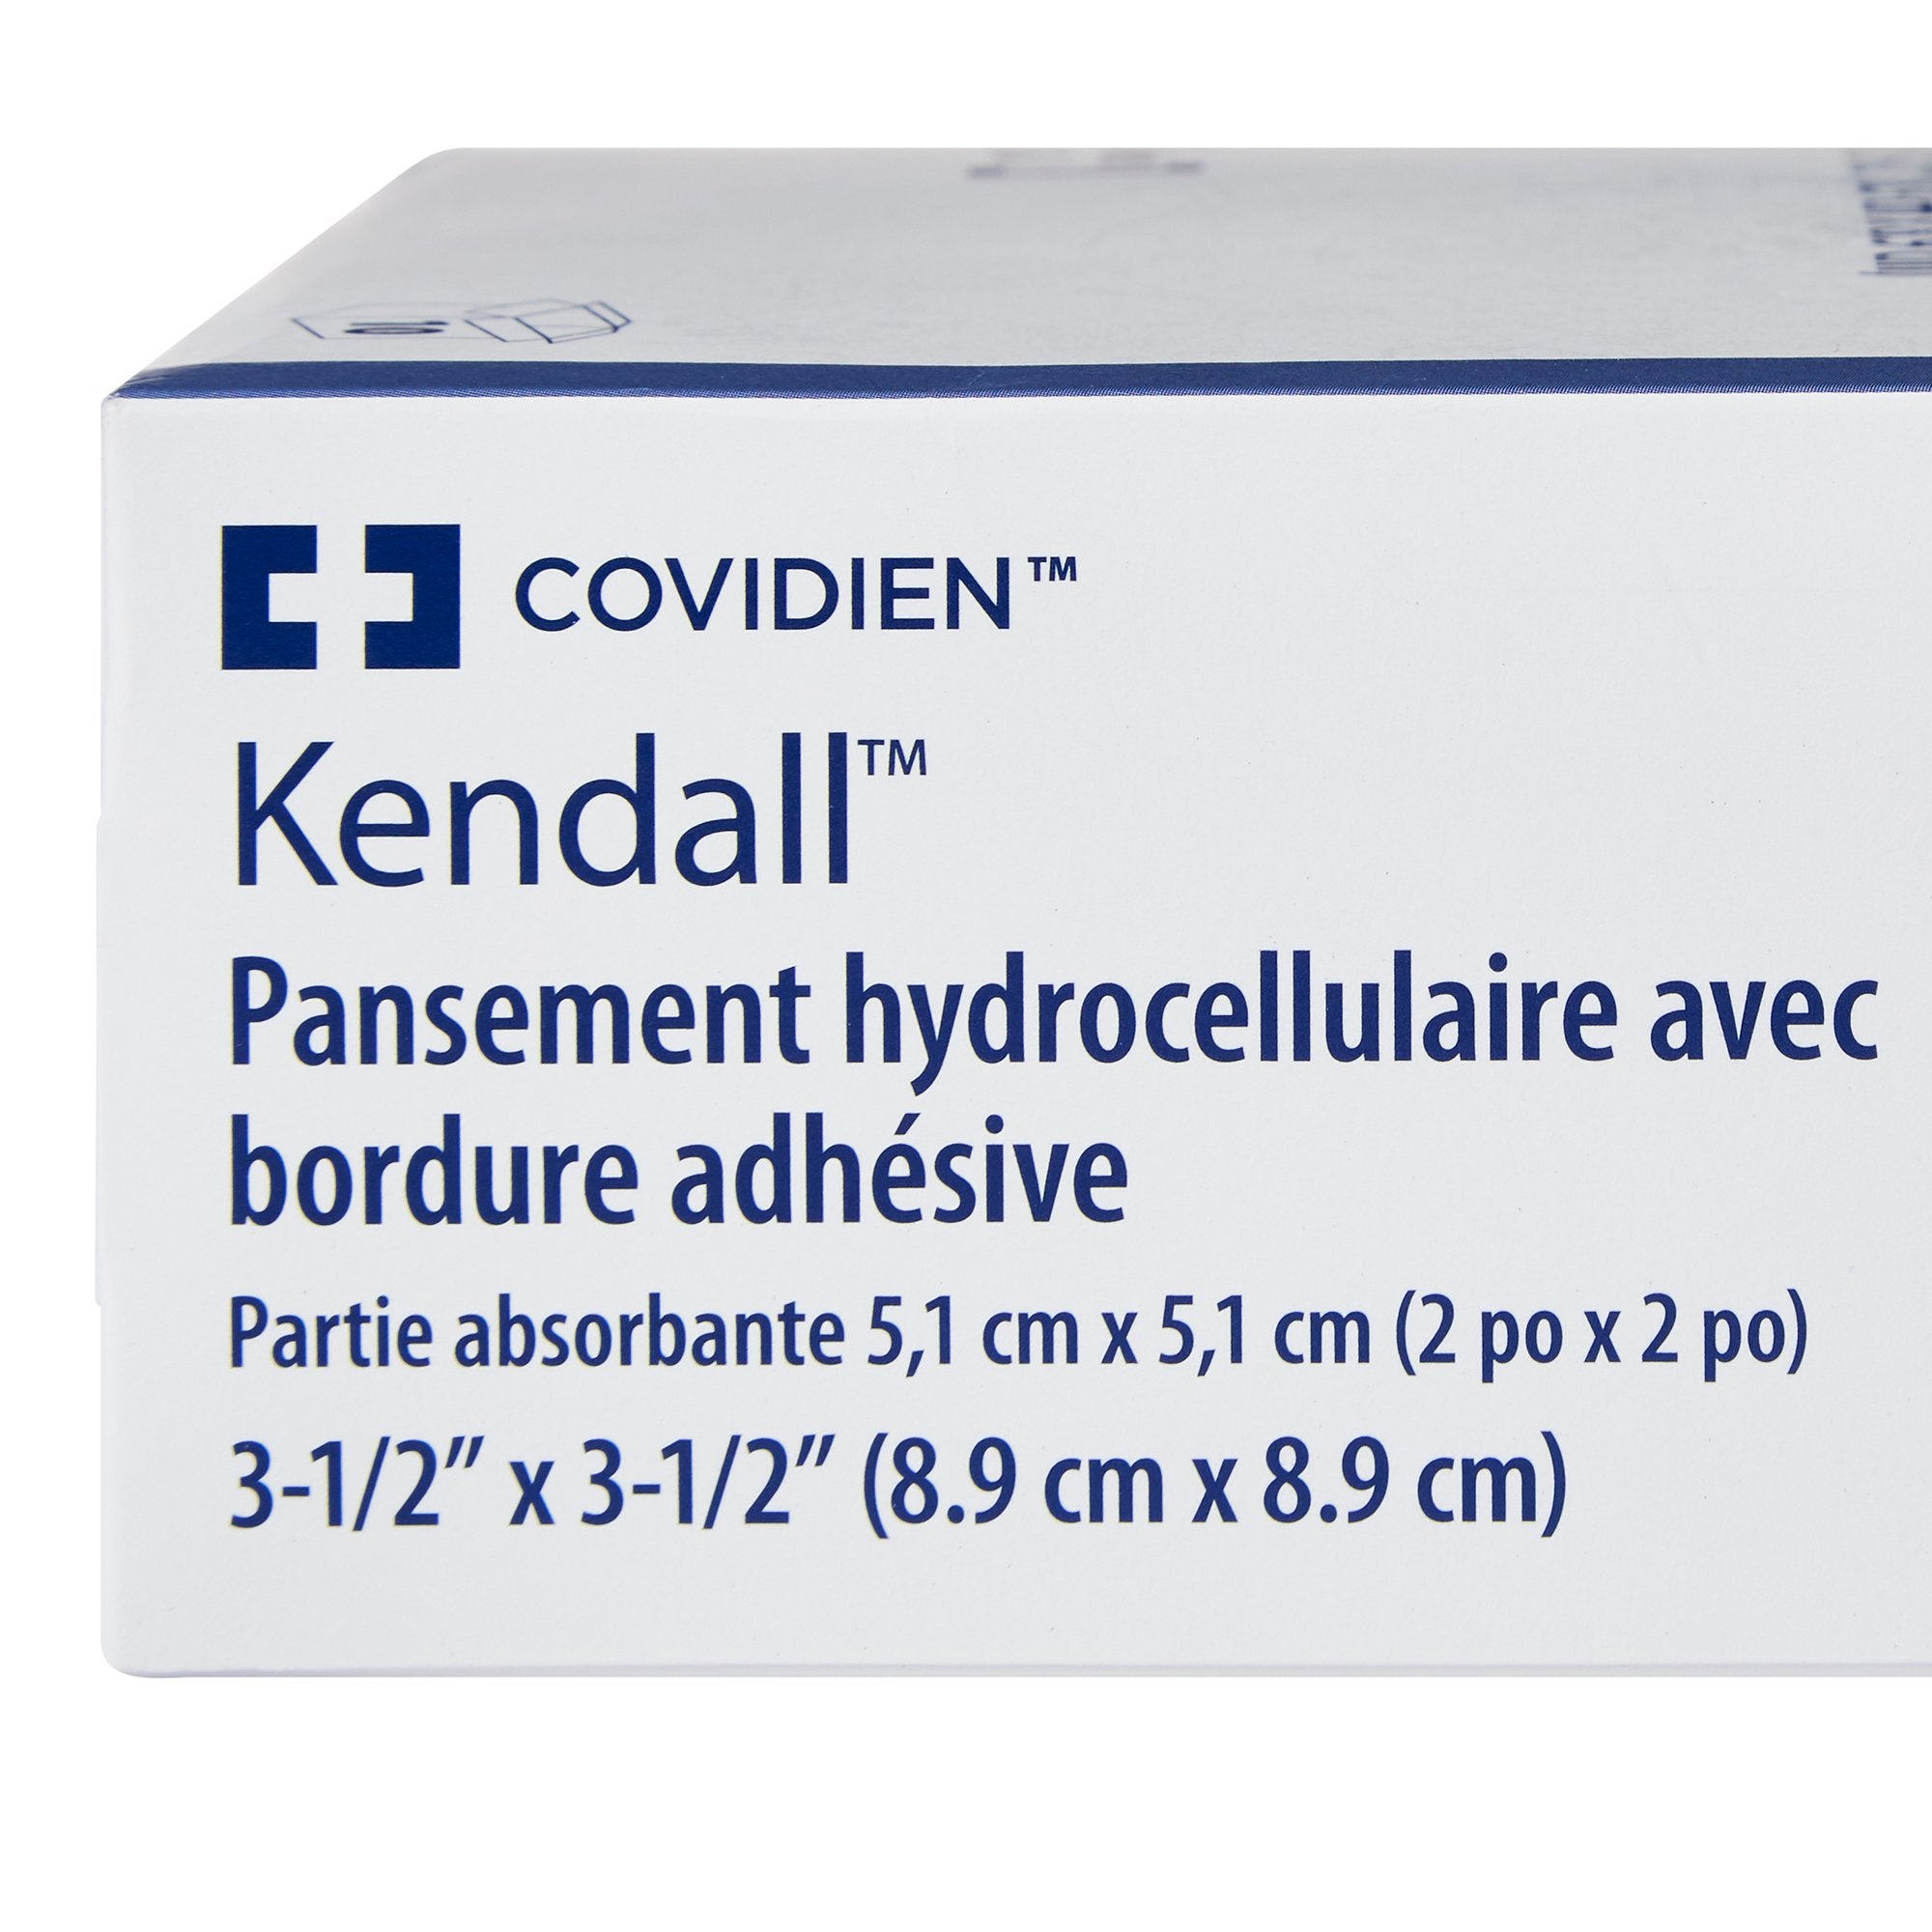 Foam Dressing Kendall™ Border Foam Gentle Adhesion 3-1/2 X 3-1/2 Inch With Border Film Backing Silicone Adhesive Square Sterile